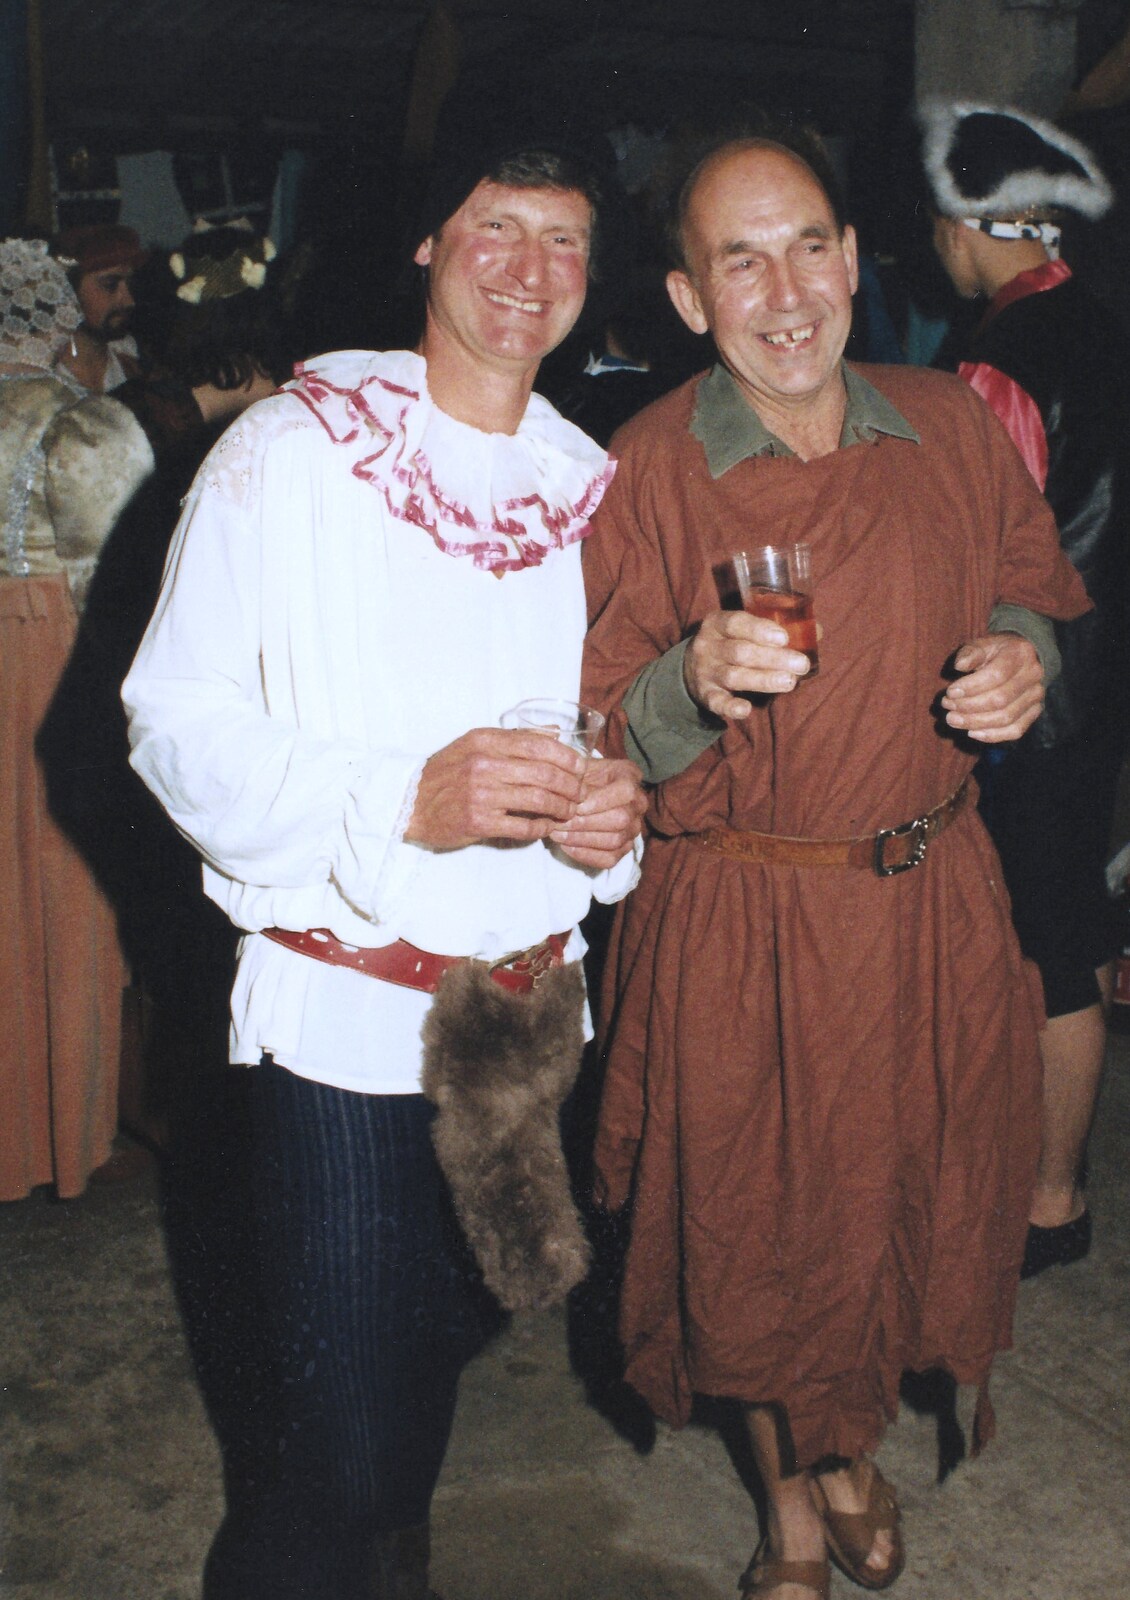 Geoff and Herbert from A Mediaeval Birthday Party, Starston, Norfolk - 27th July 1990